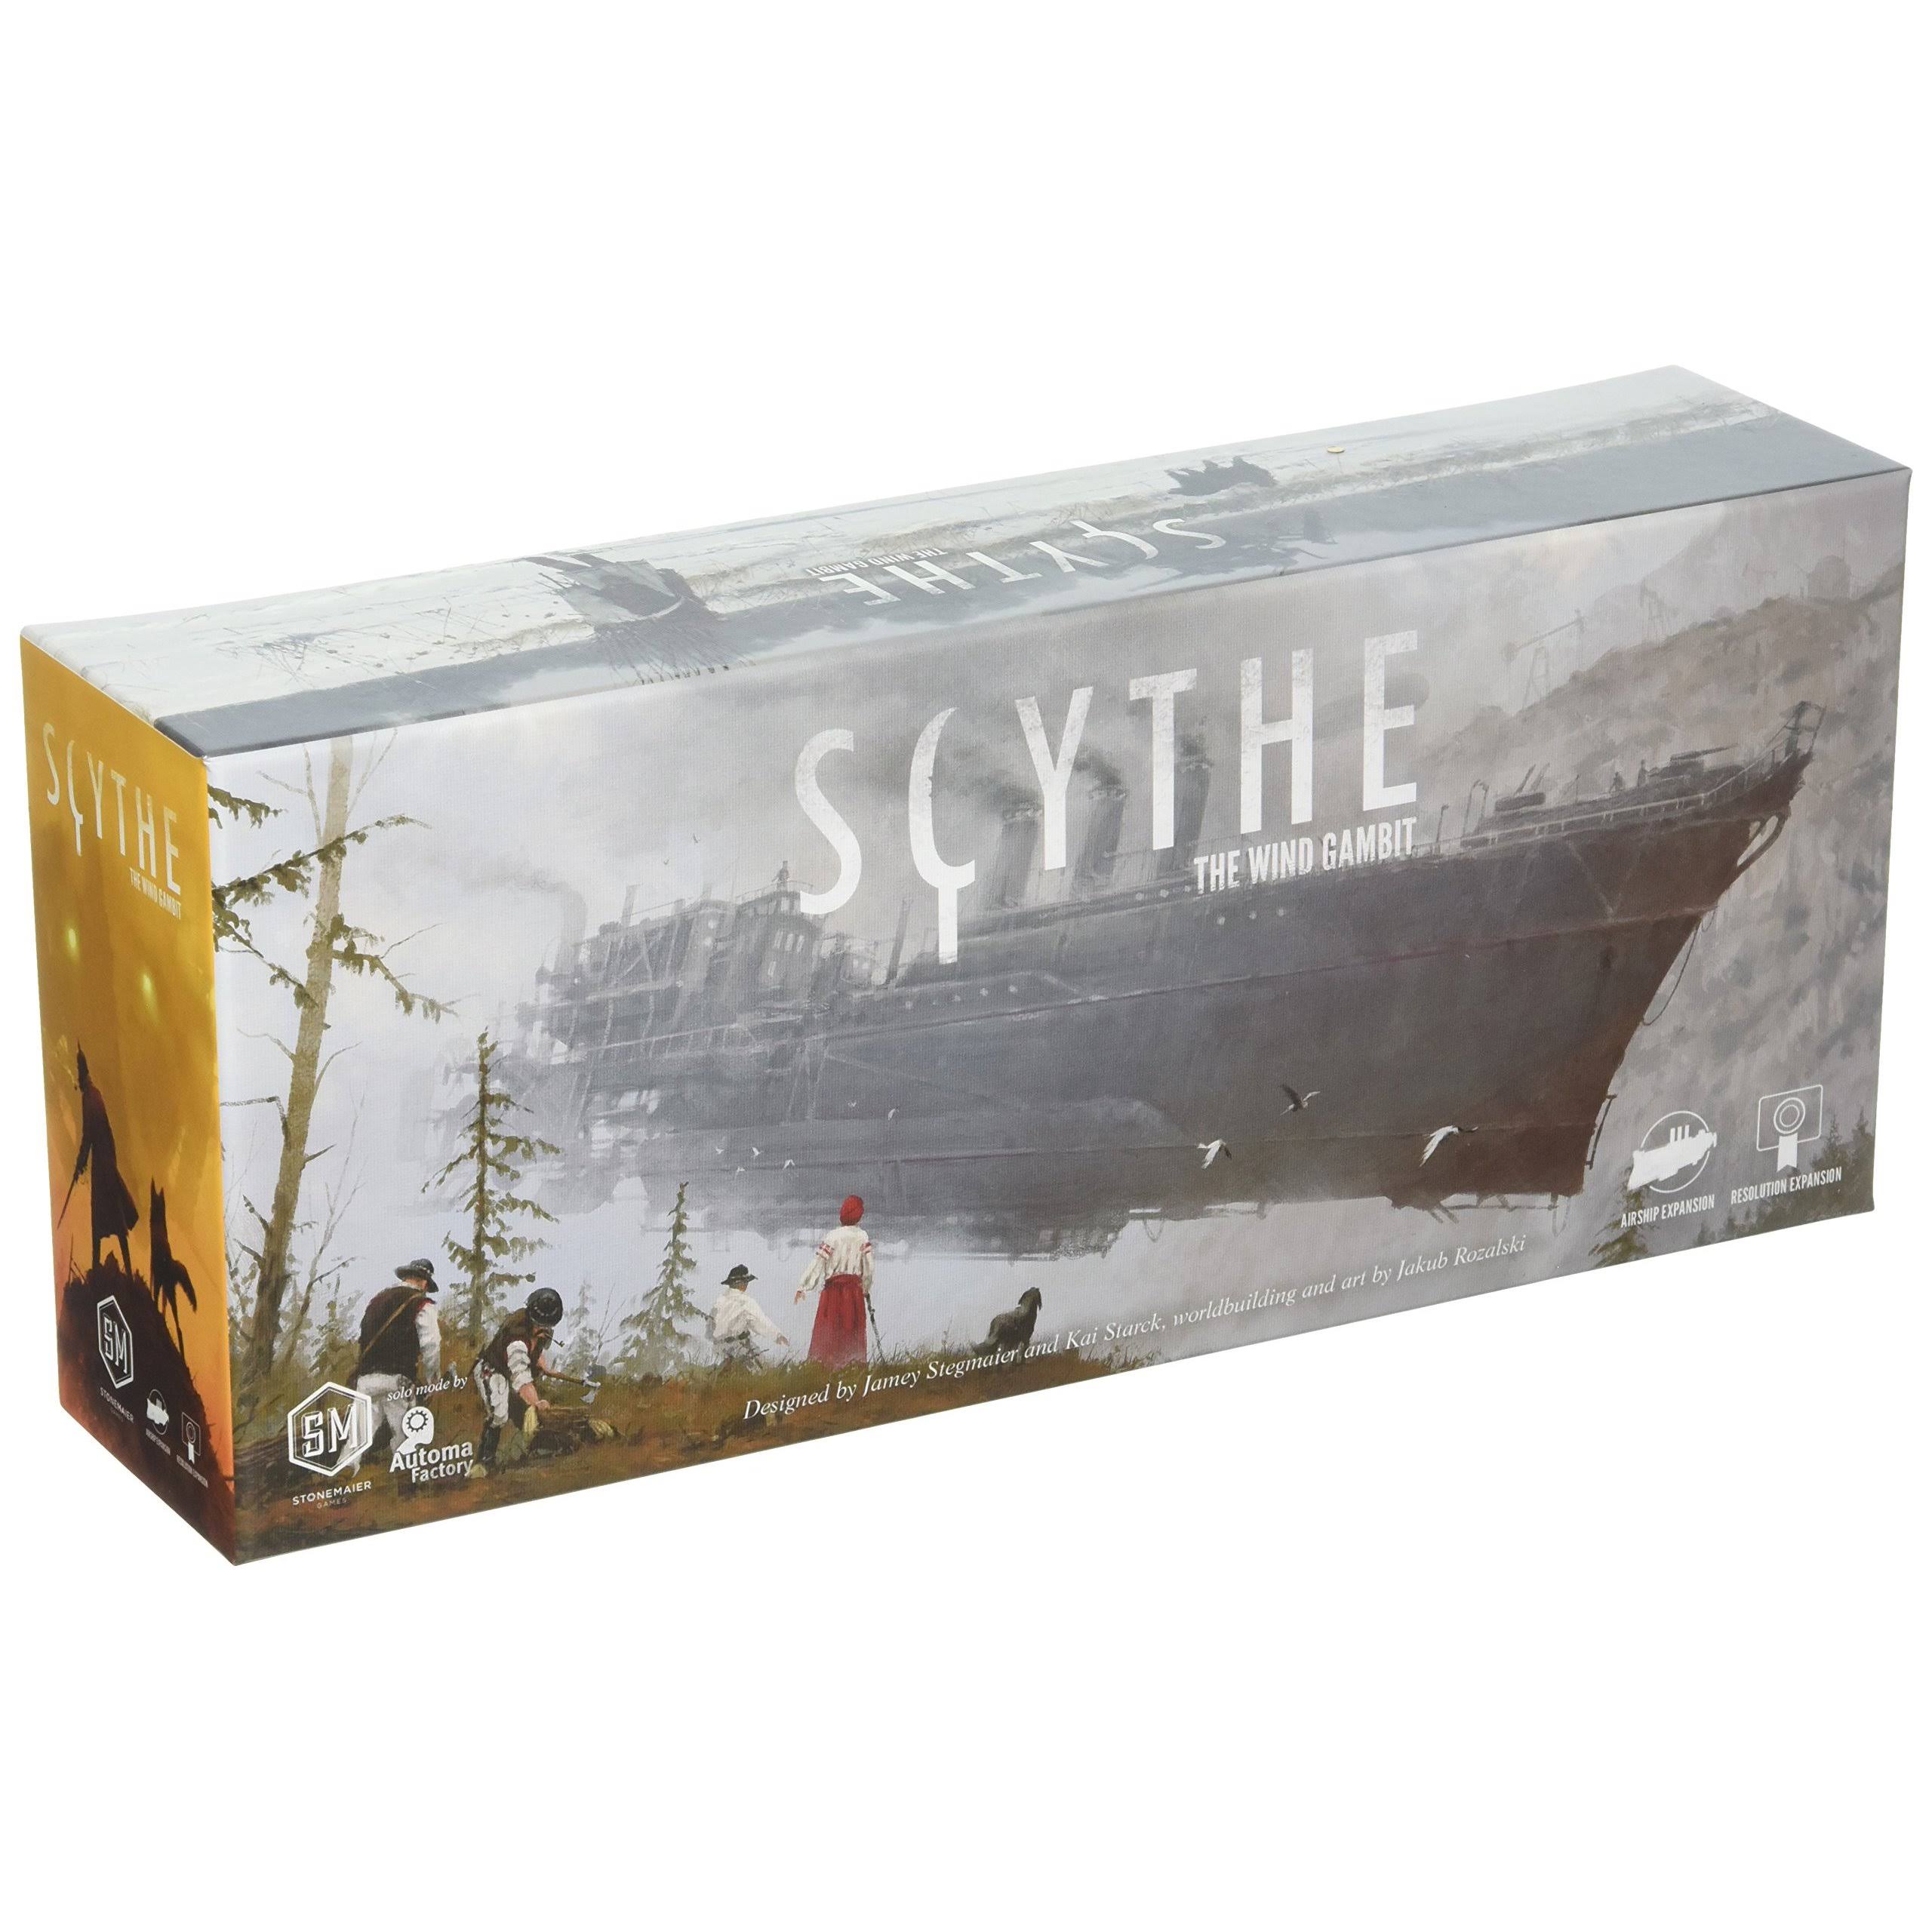 Scythe The Wind Gambit Expansion Board Game